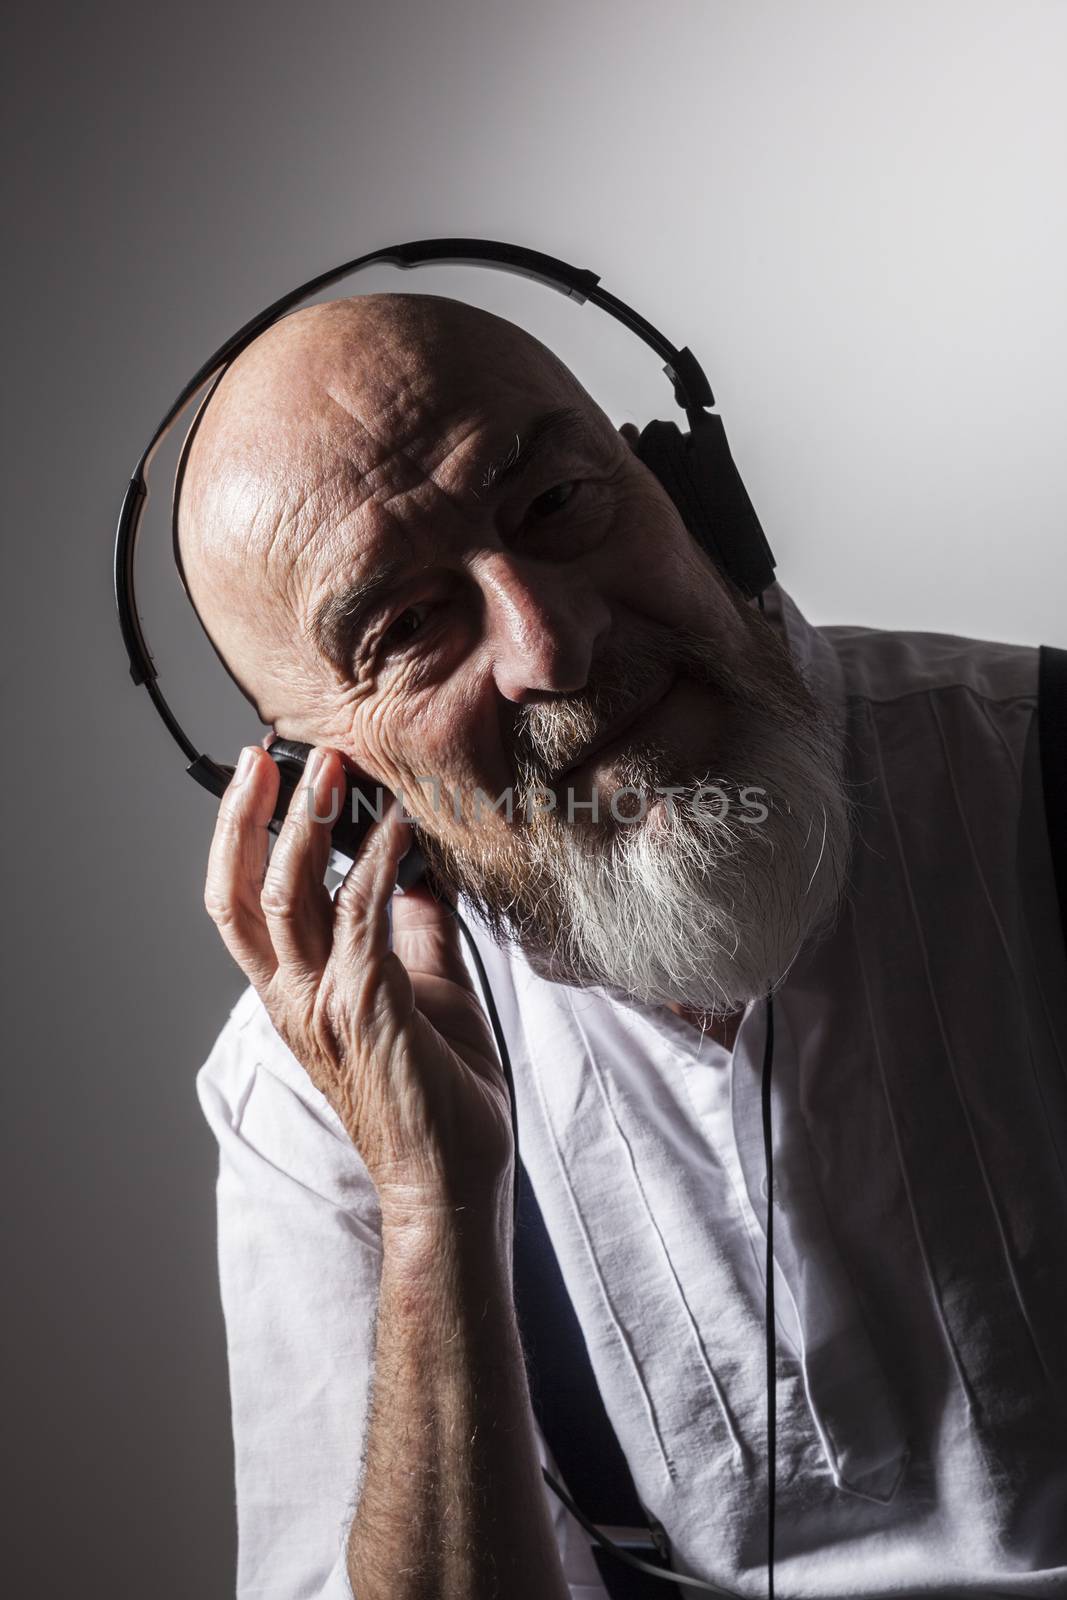 An image of an old man listening to music